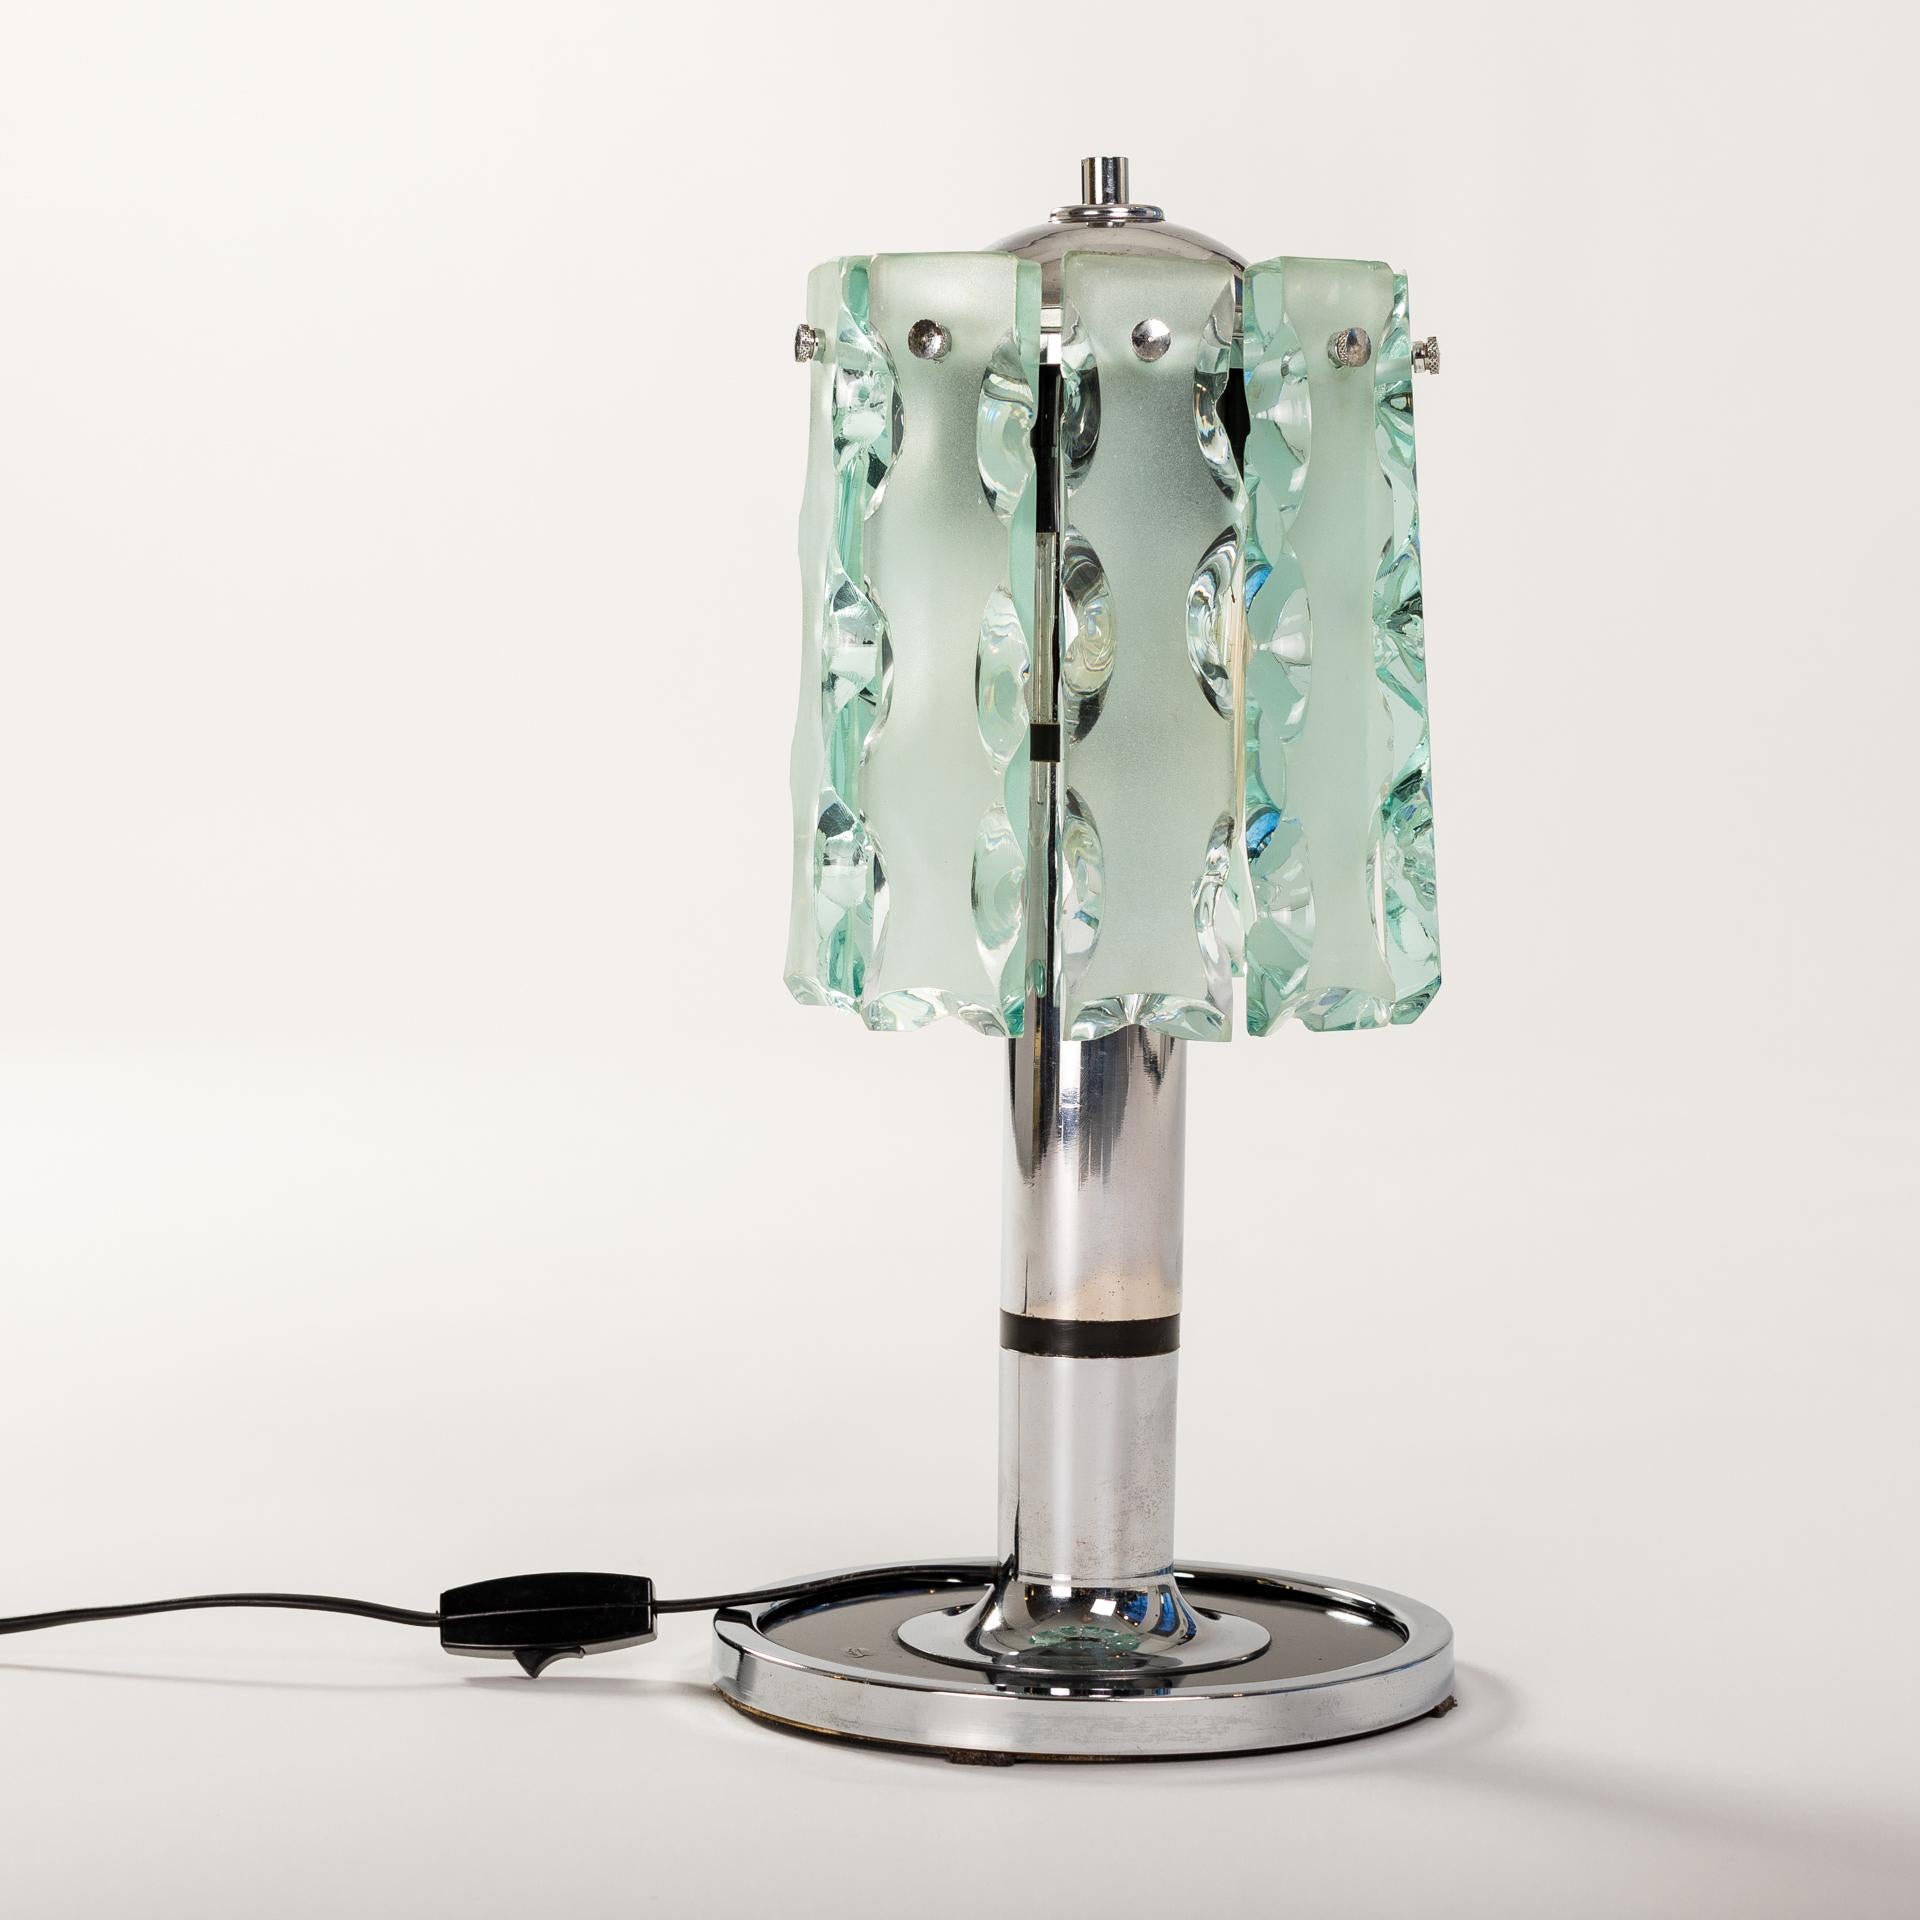 Small table lamp with nickel-plated metal base and pieces of green Fontana Arte glass (Verde Nilo Color) as a shade. 
Fontana arte Zero Quattro anni 60/70
The handmade pieces of glass have the following dimensions: 10cm x 4cm x 1.5cm.
The surface is